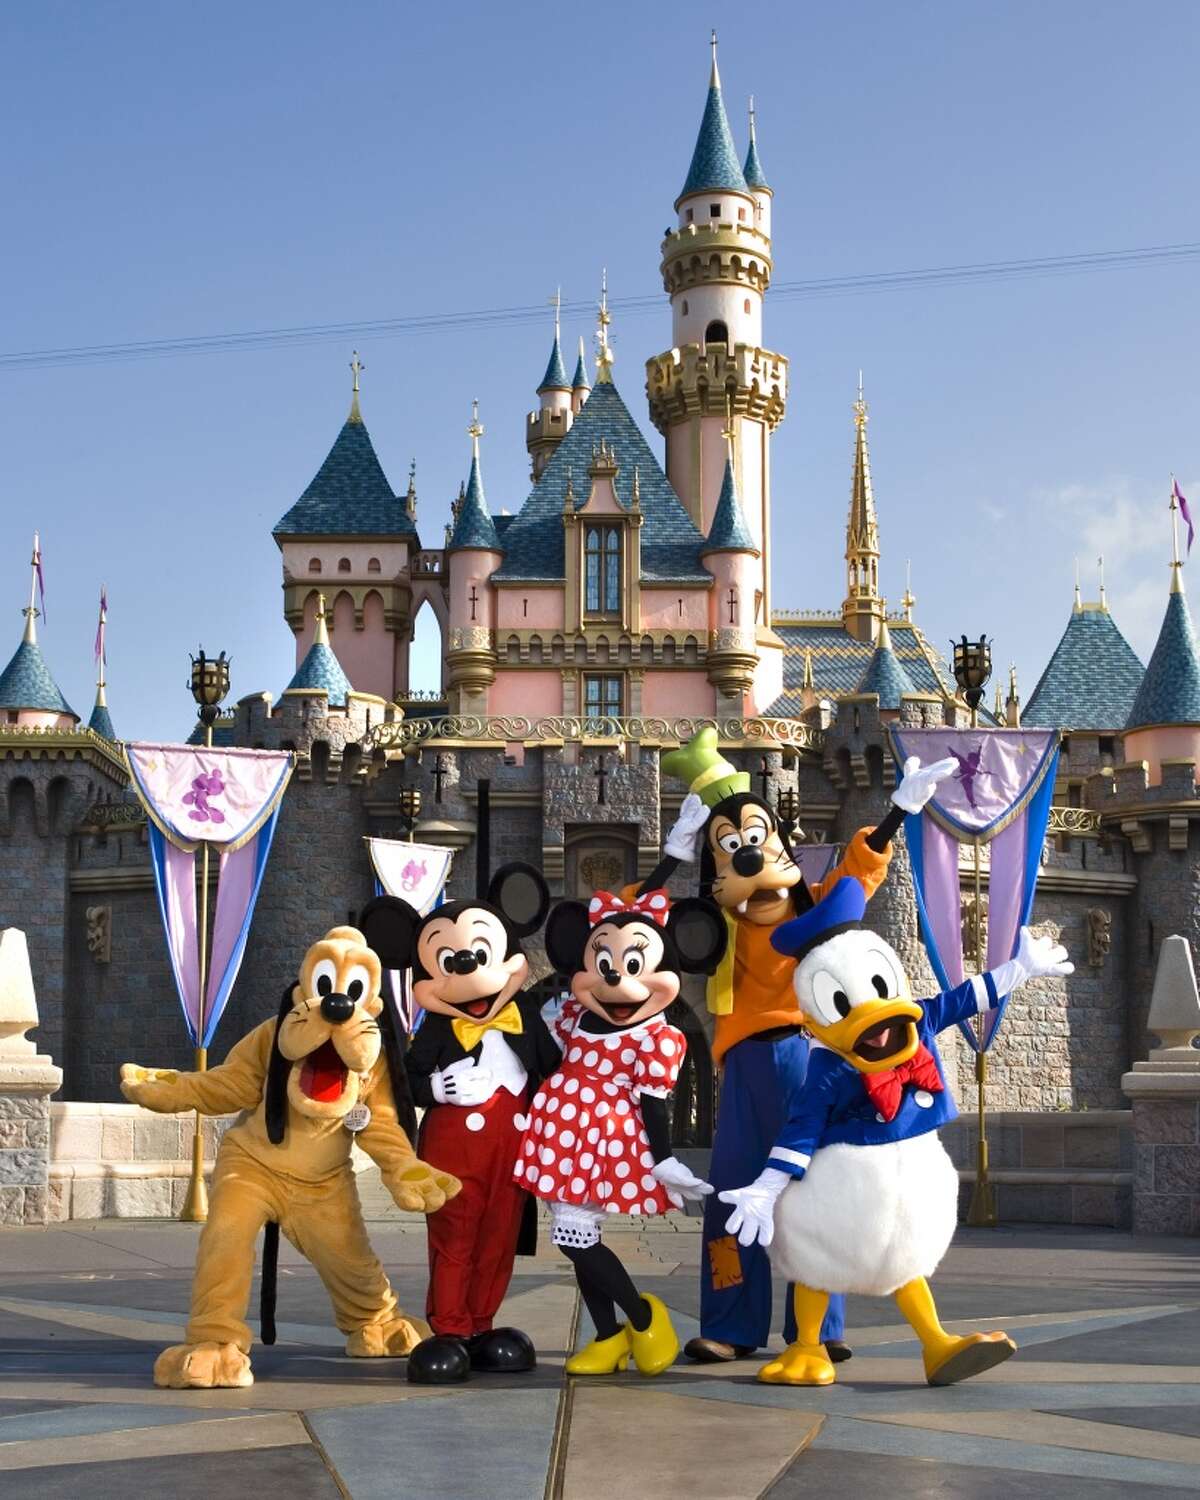 15. Disneyland face character Average salary: $32,000 Duties: Work at Disneyland and perform as a famous character  Requirements: Acting skills, height and appearance regulations Source: SAVOO